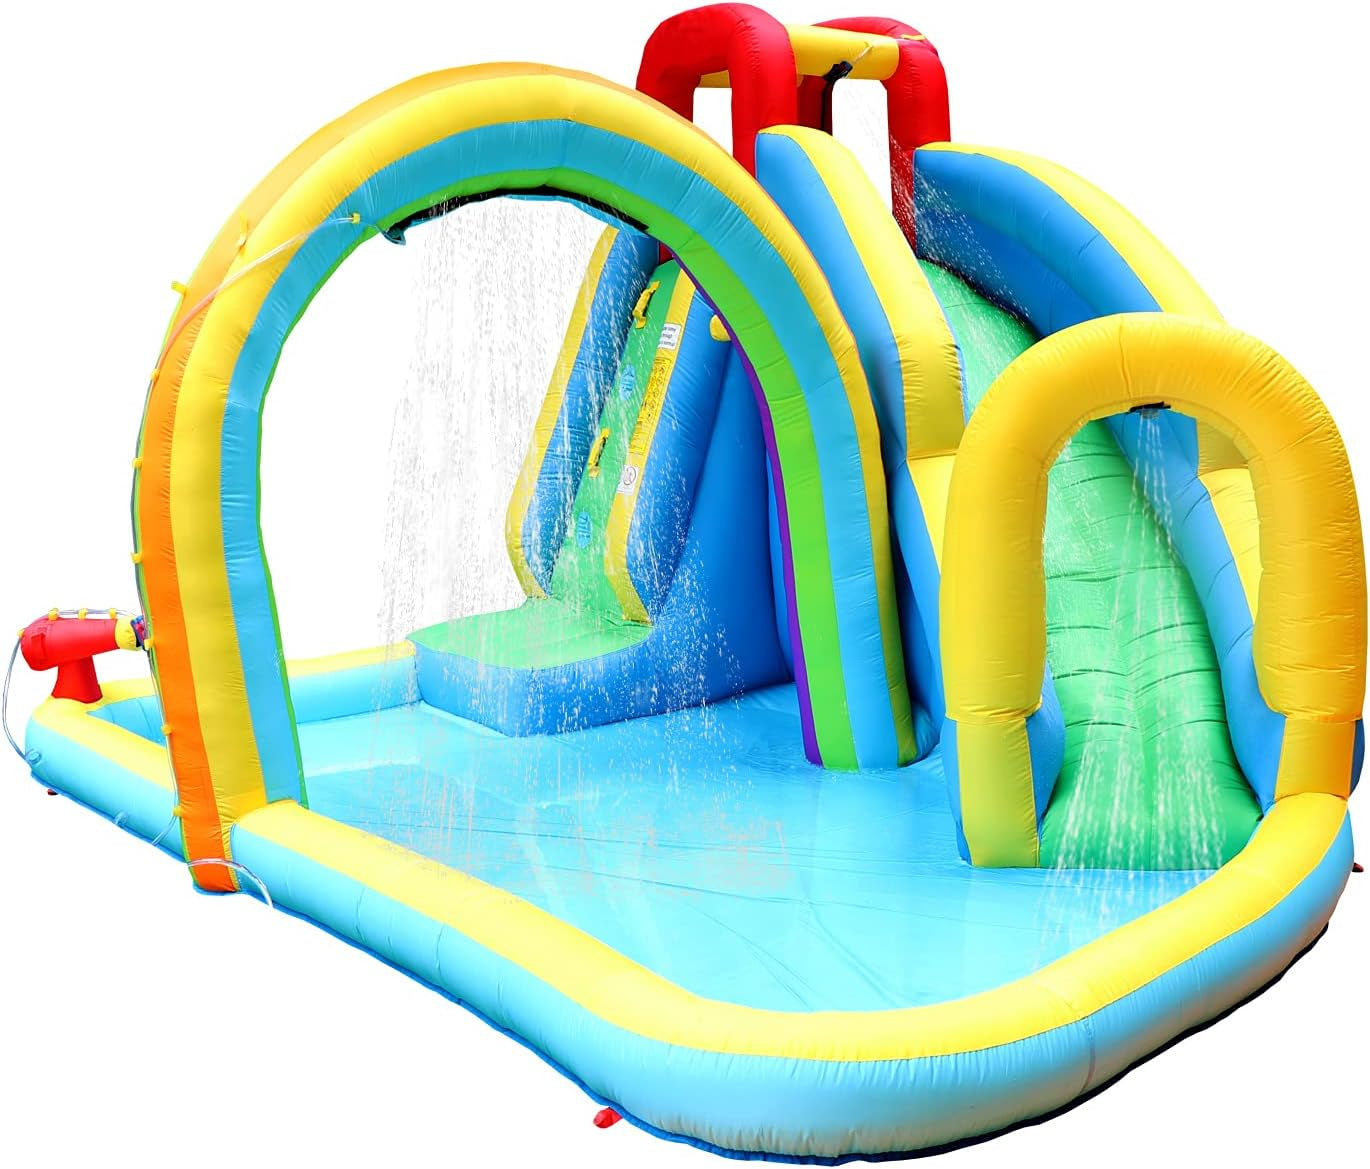 Inflatable Water Slide Park with Air Blower, Kids Inflatable Bouncer House Slide, Climbing Wall, Splash Pool and Rainbow Sprinkler